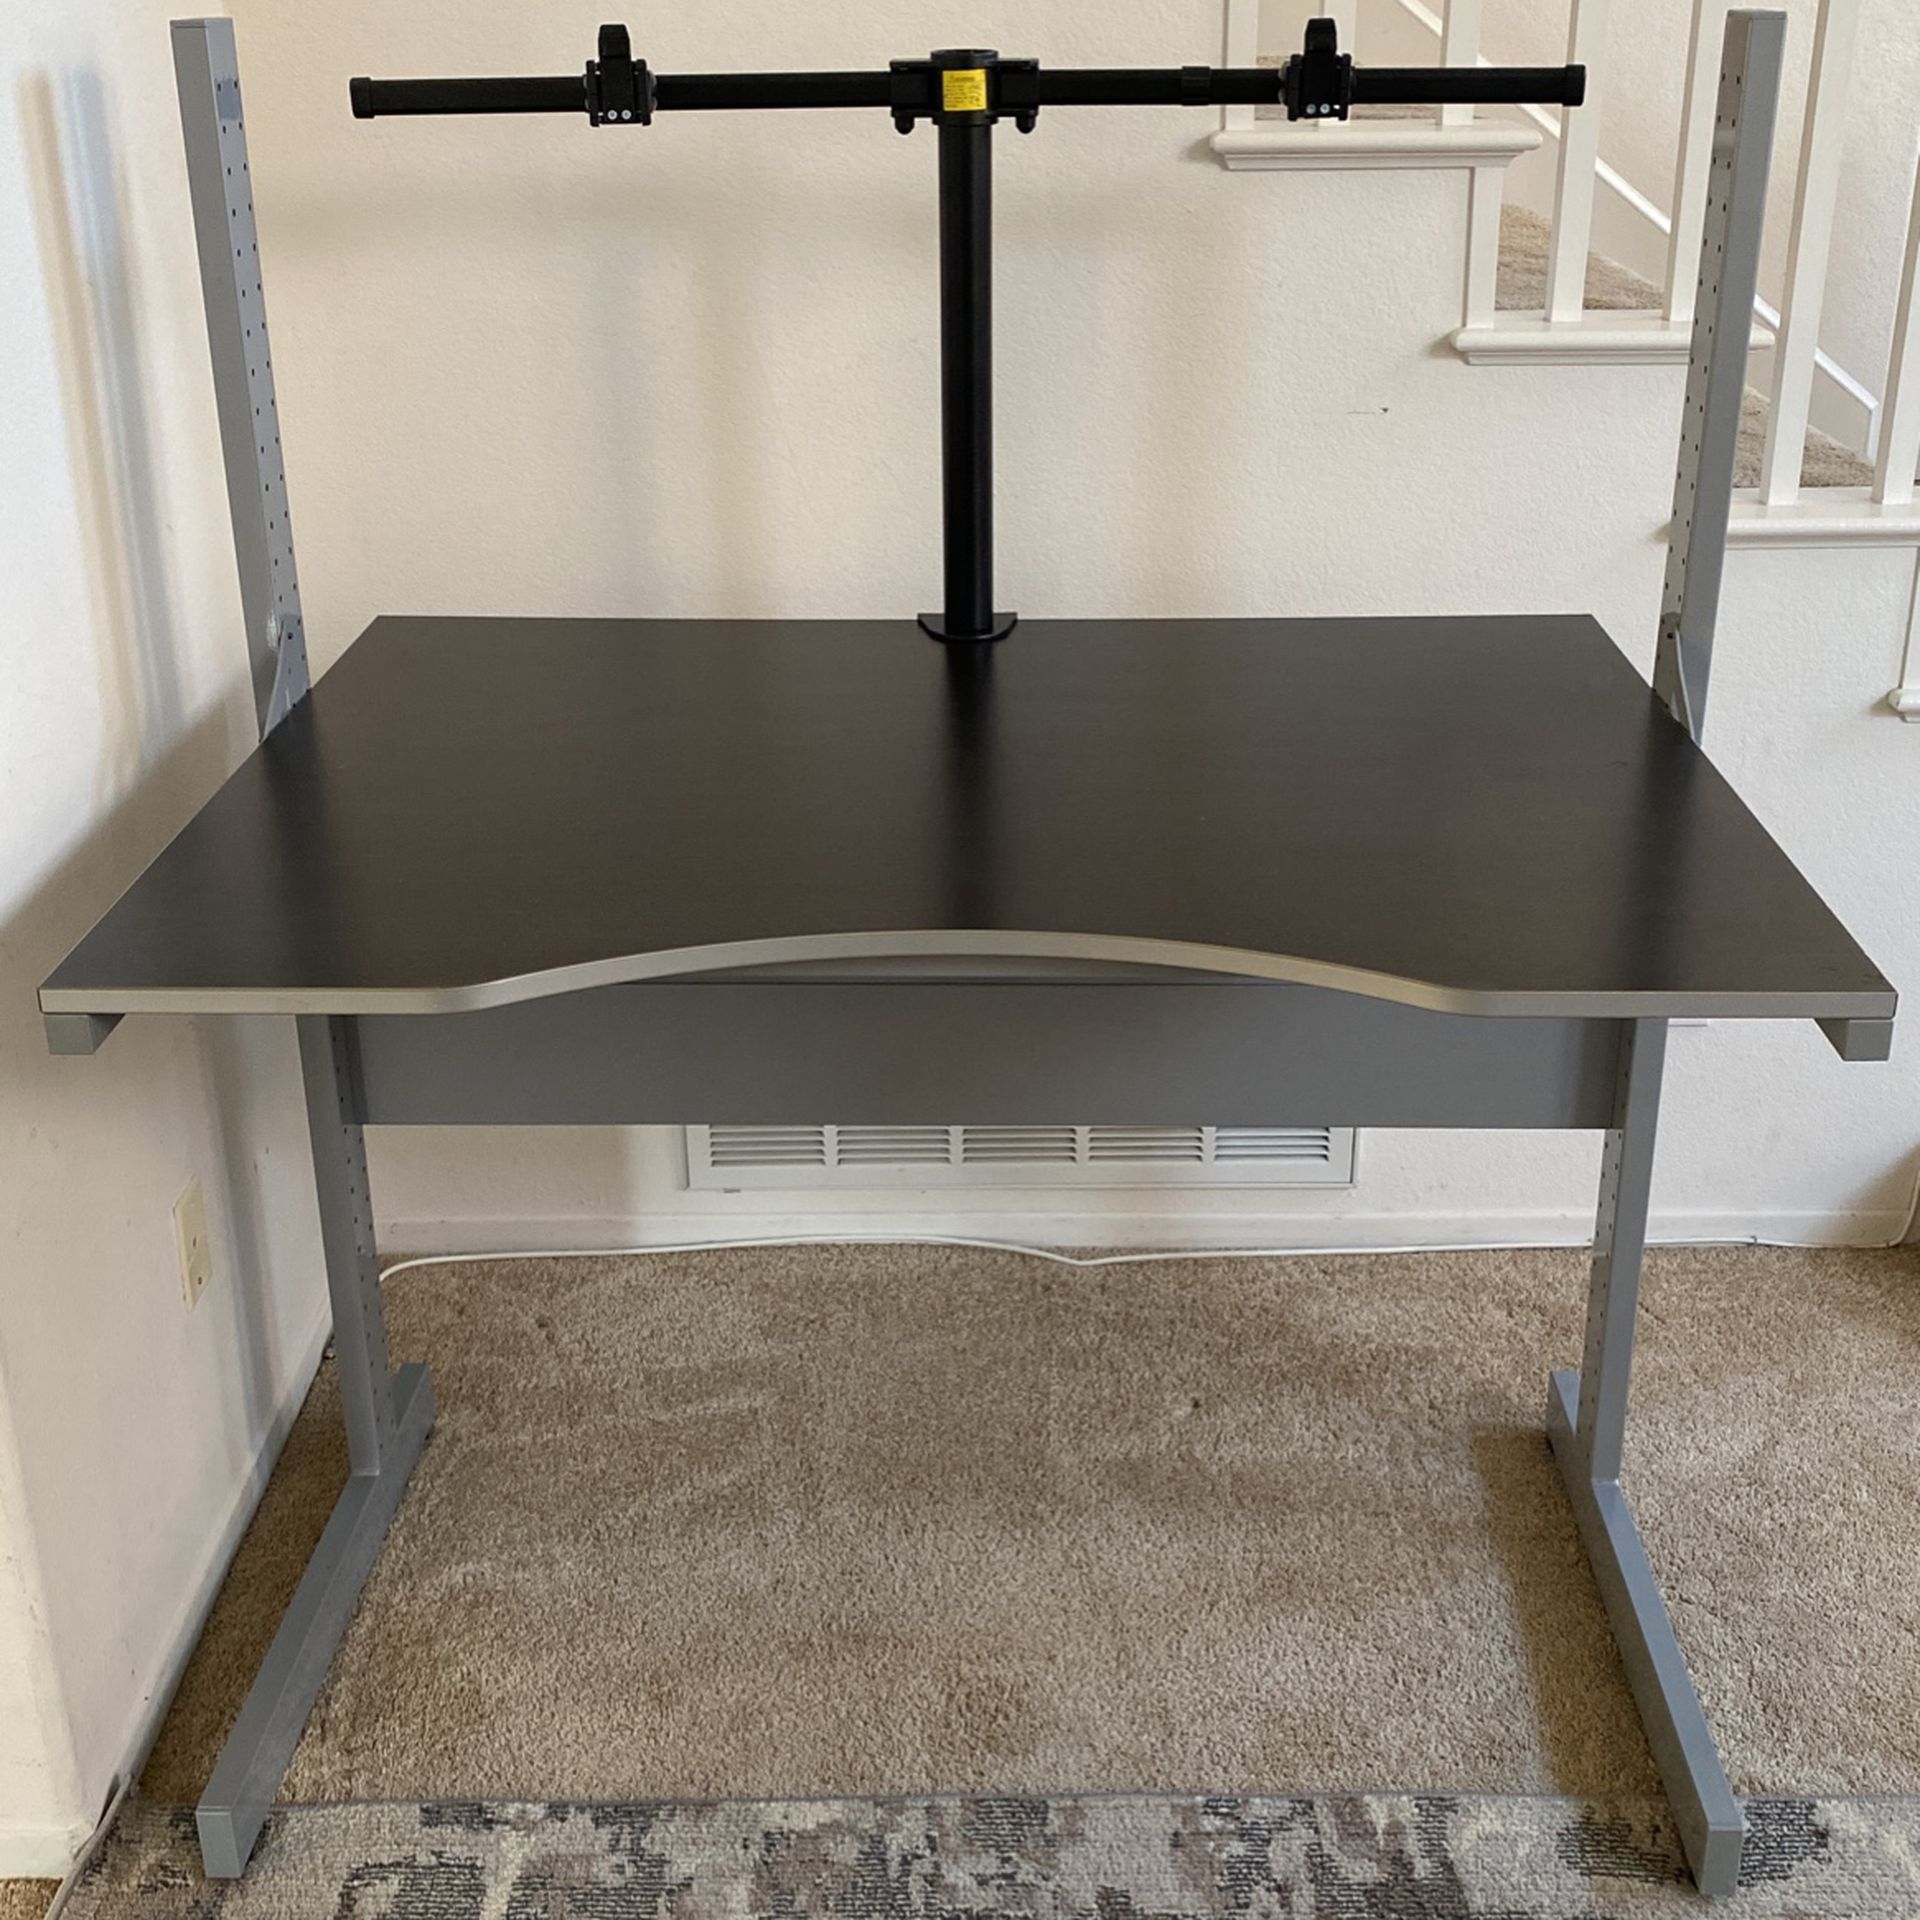 IKEA Jerker desk with dual monitor stand